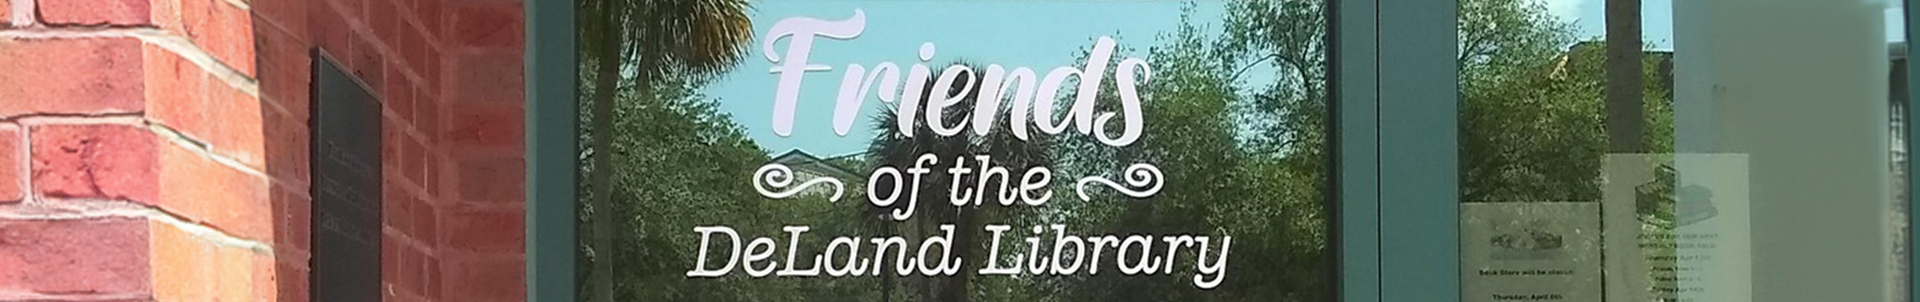 Friends of the Deland Library